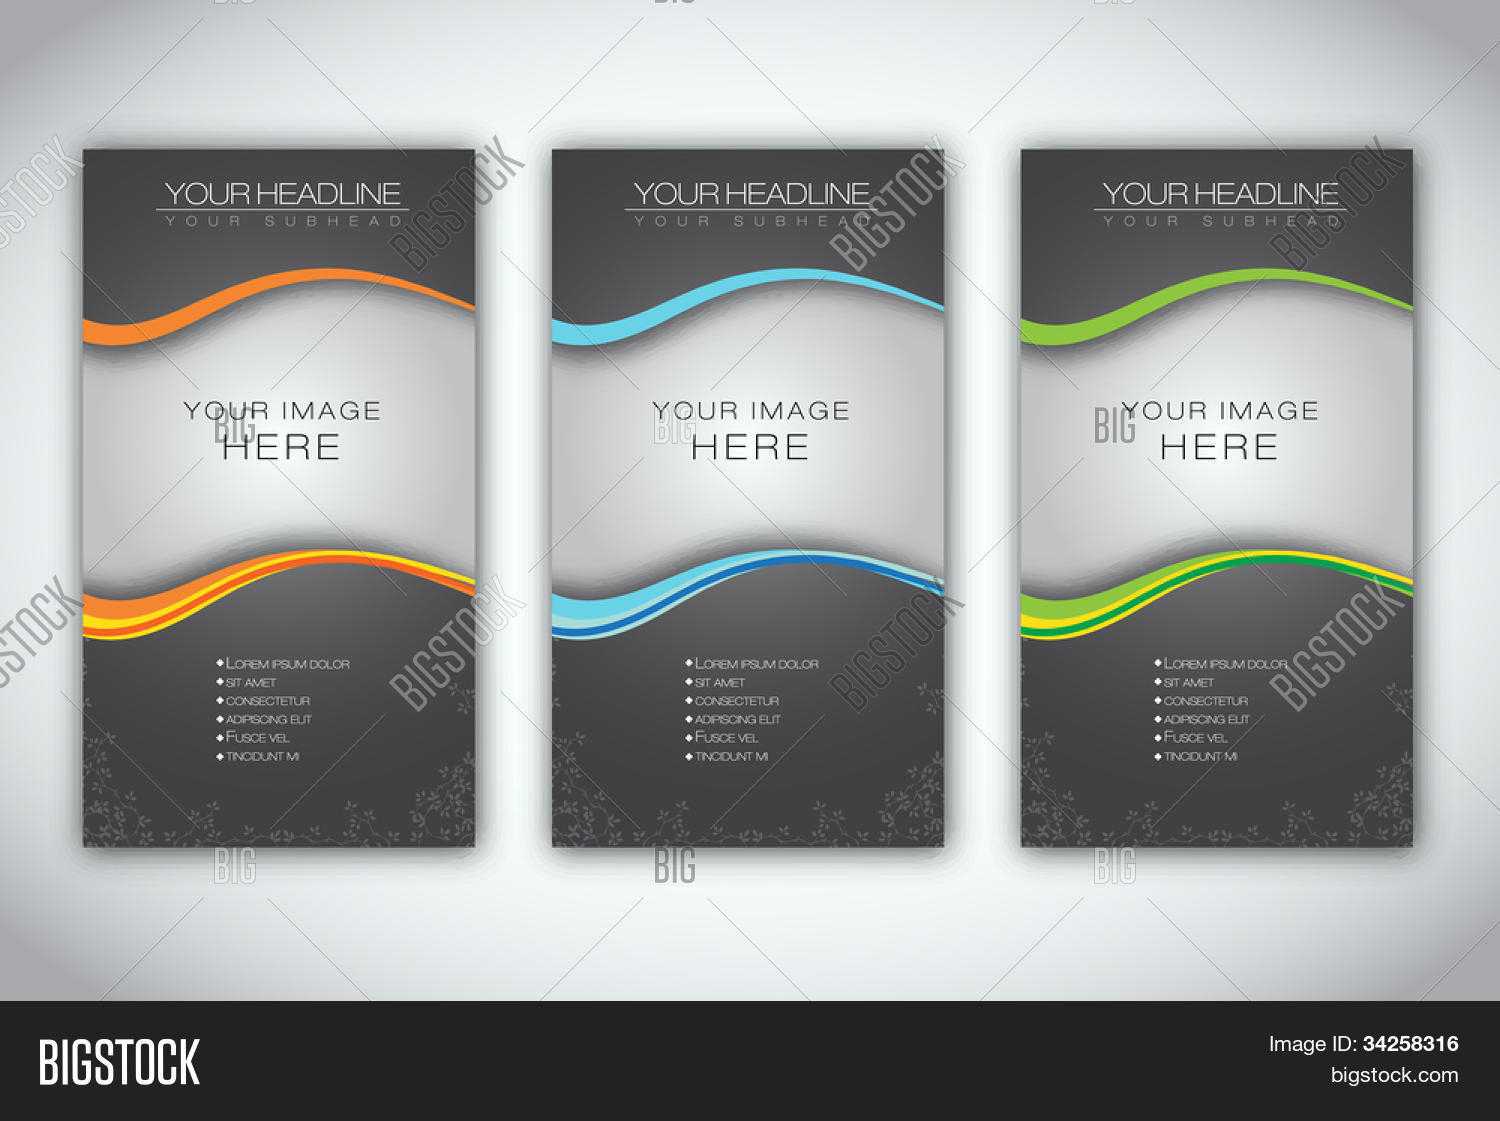 Set Blank Brochure Vector & Photo (Free Trial) | Bigstock With Regard To Free Brochure Templates For Word 2010